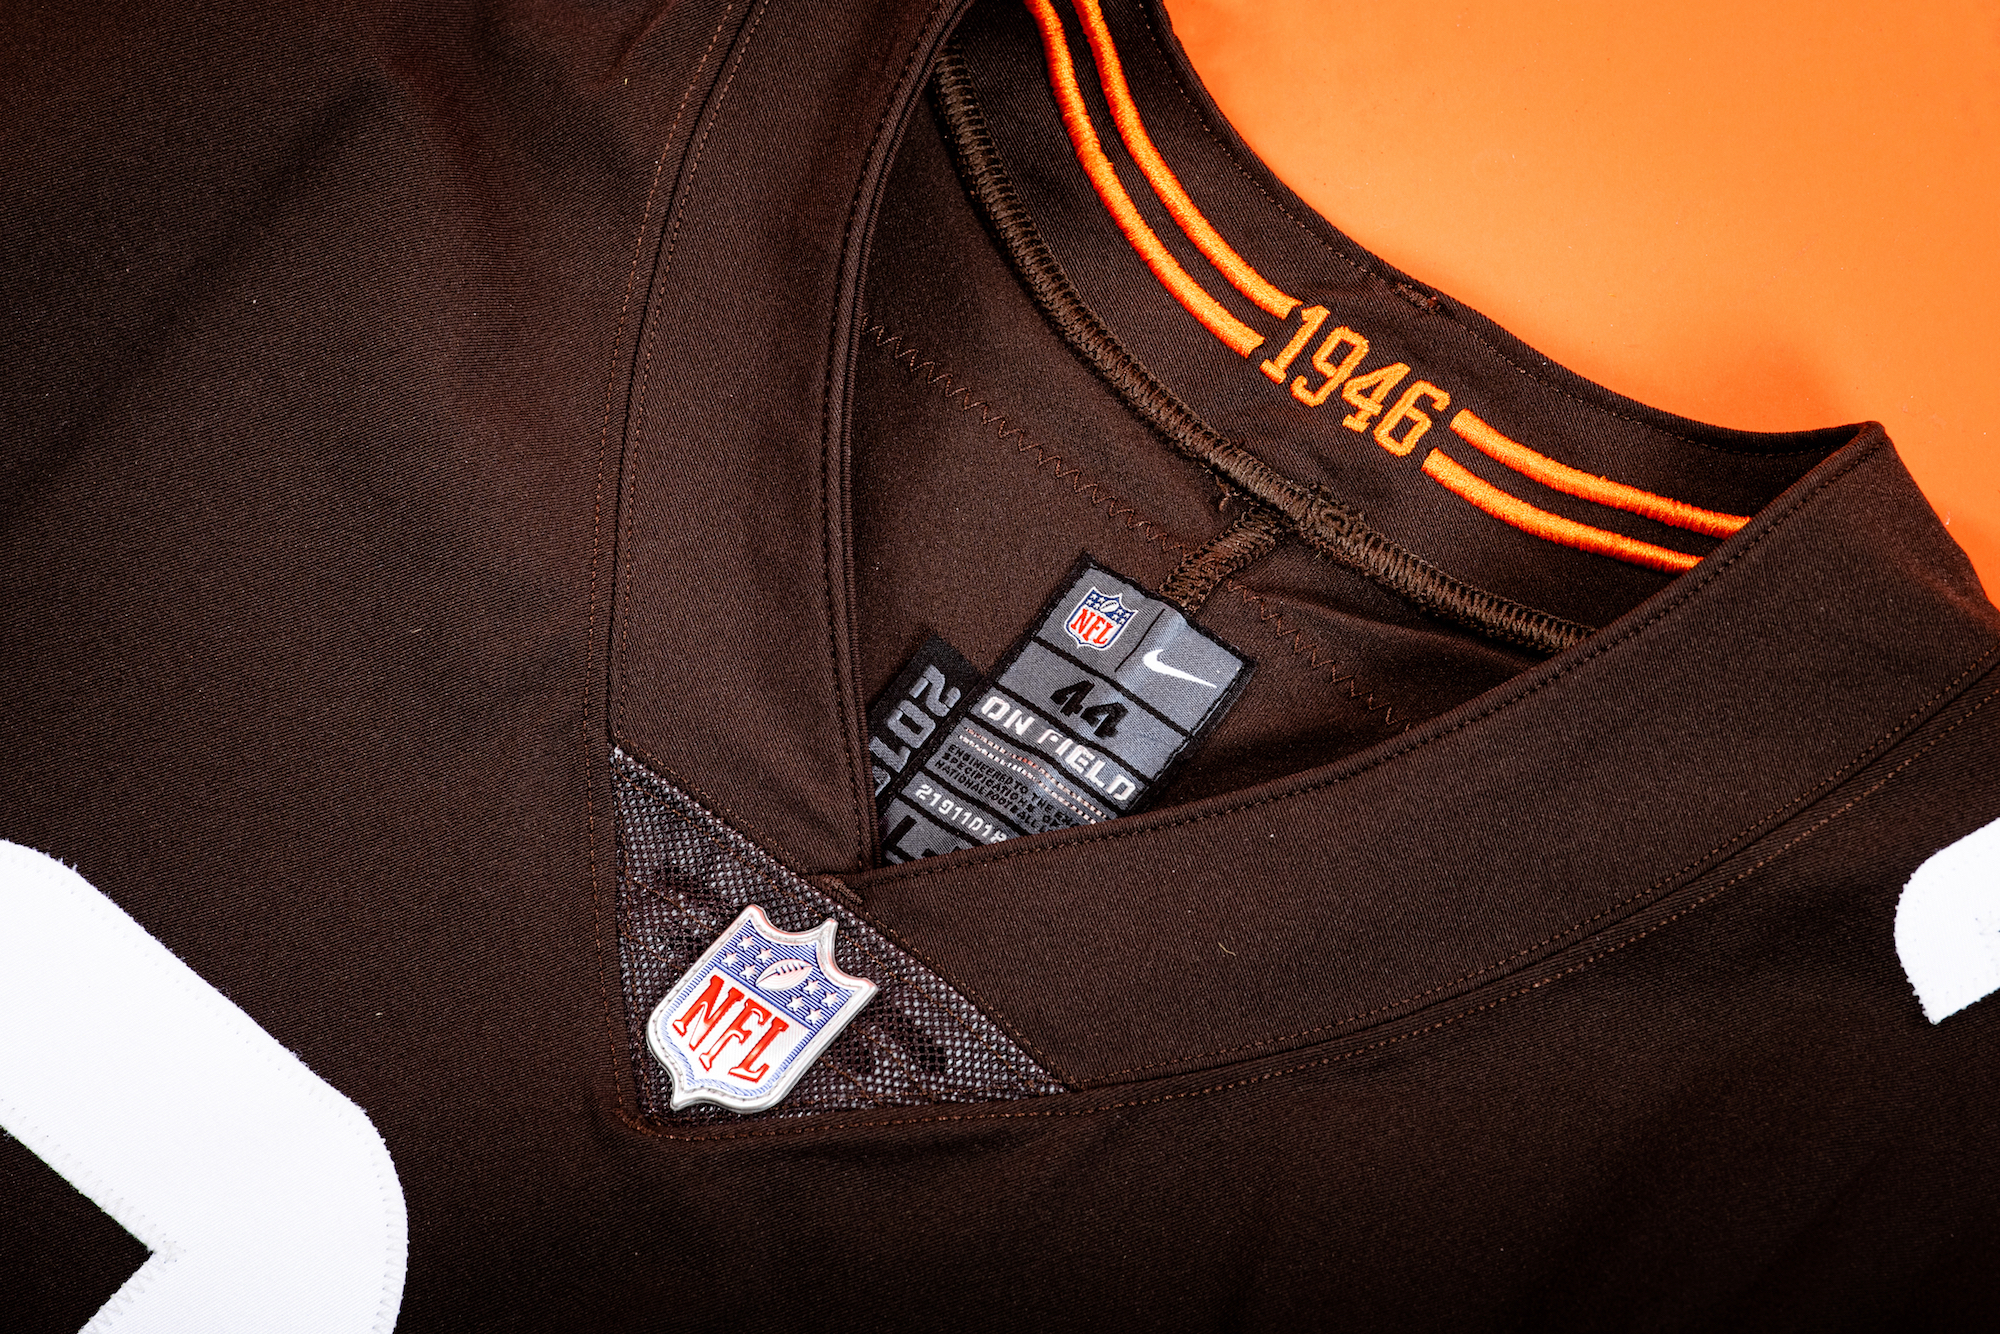 Browns Owner Says Team Will “Find a Way” to Add Orange Pants